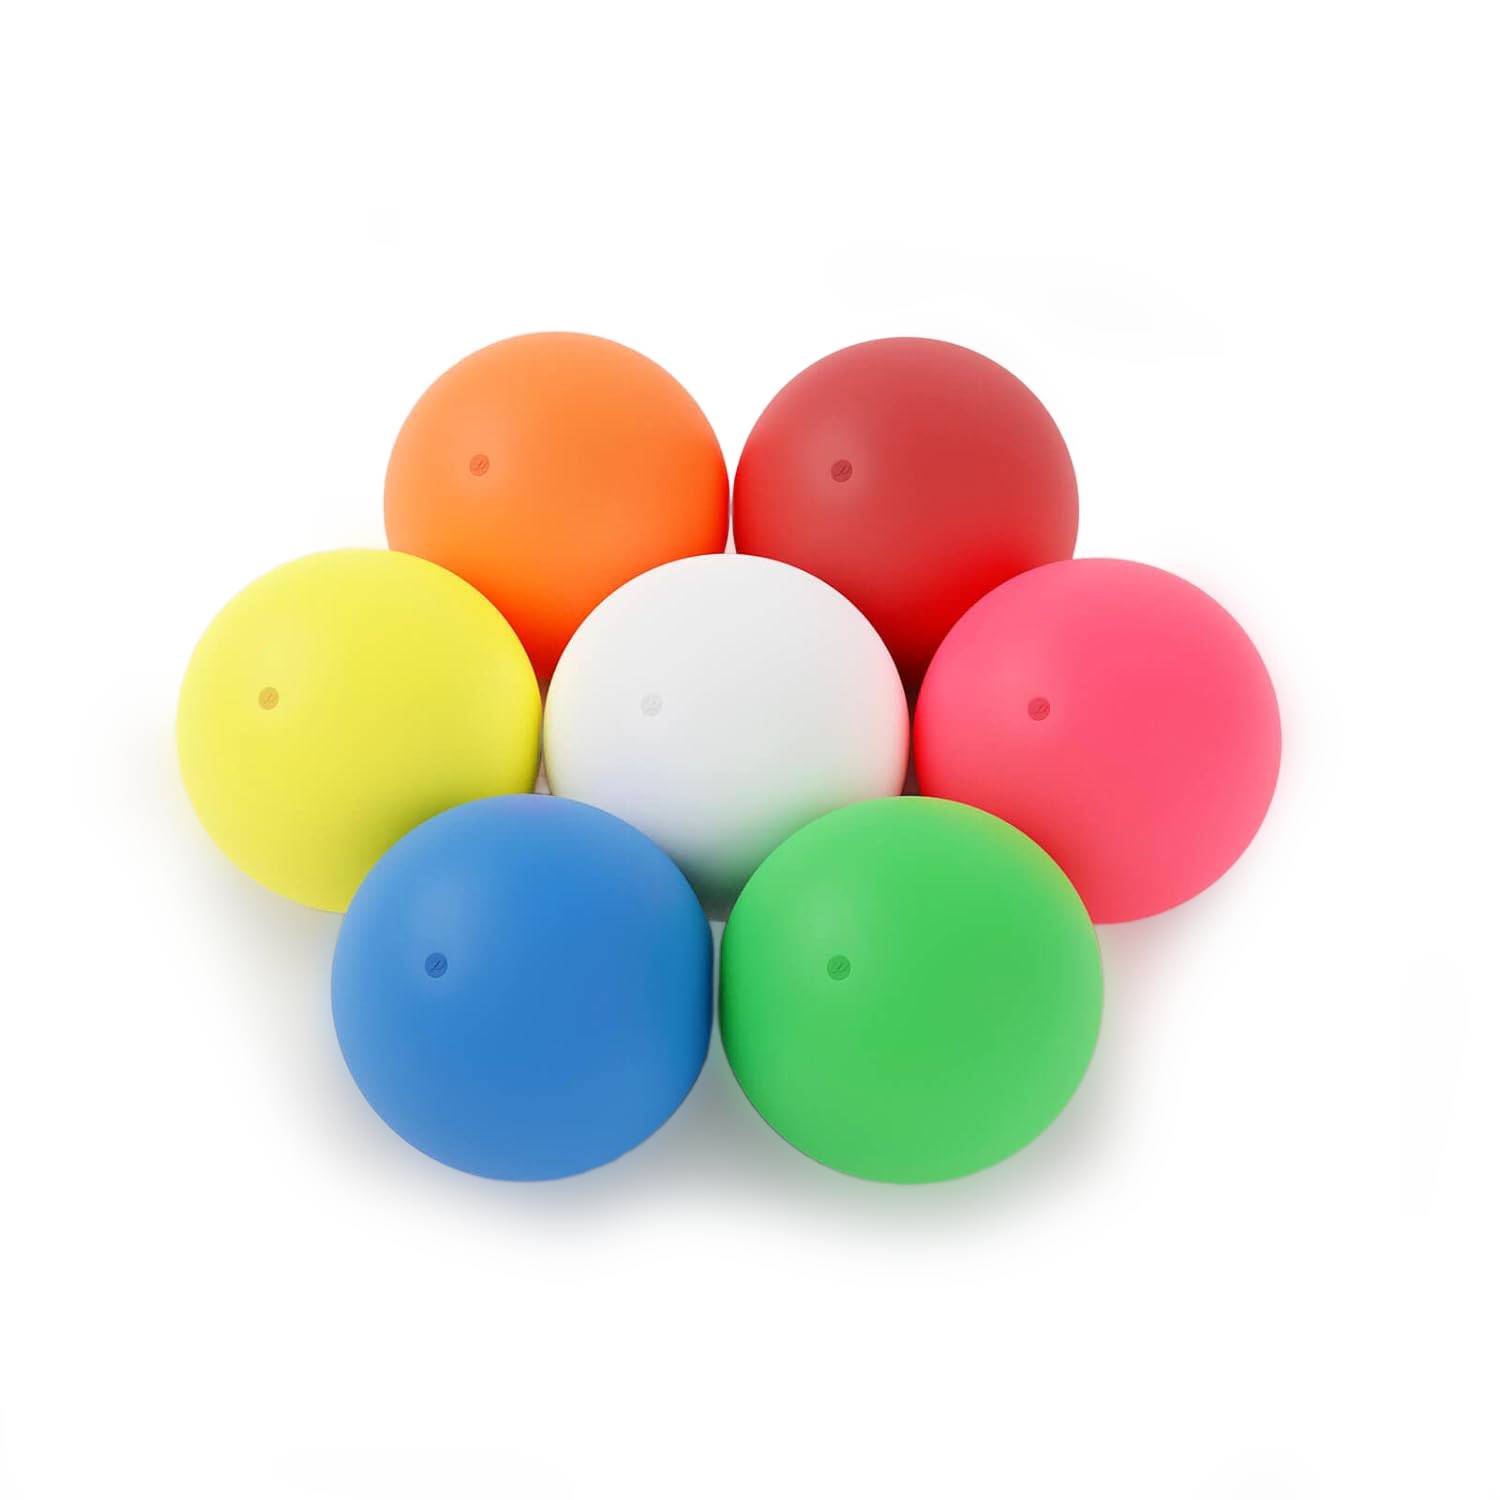 MMX 67mm juggling balls group shot with all colours